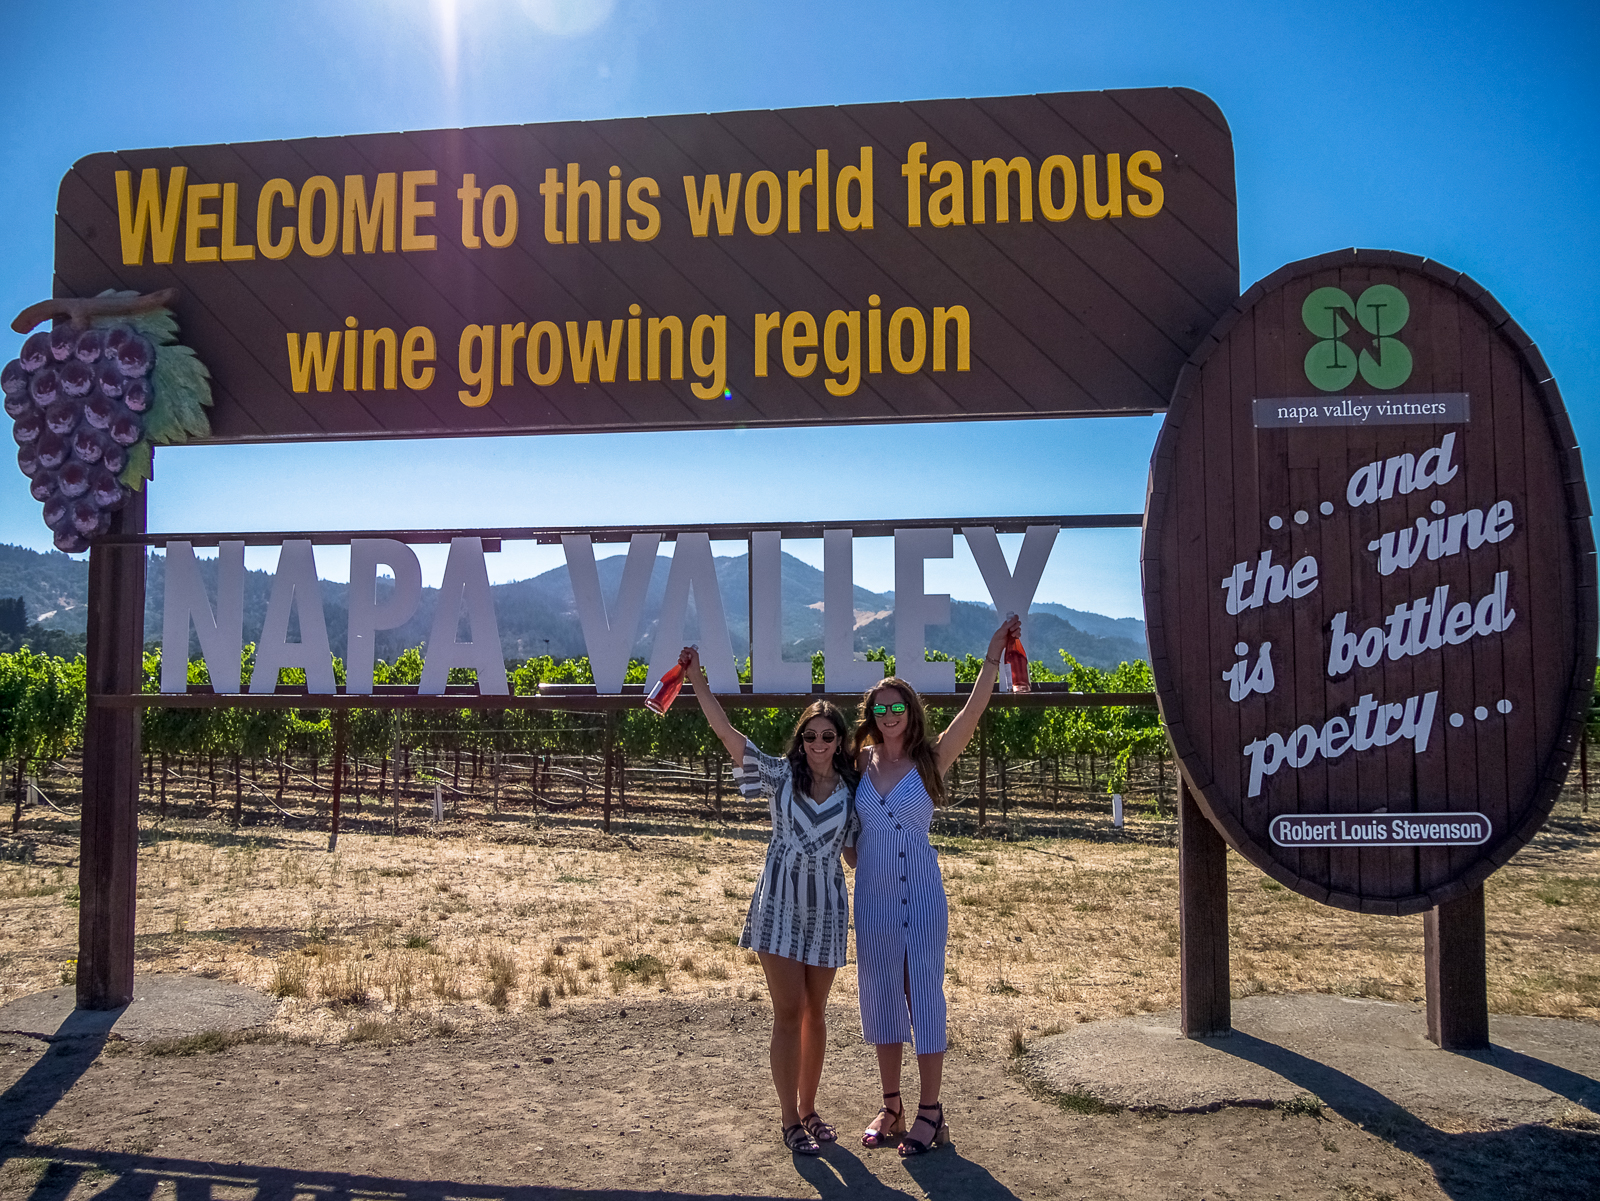 Welcome to Napa Valley sign